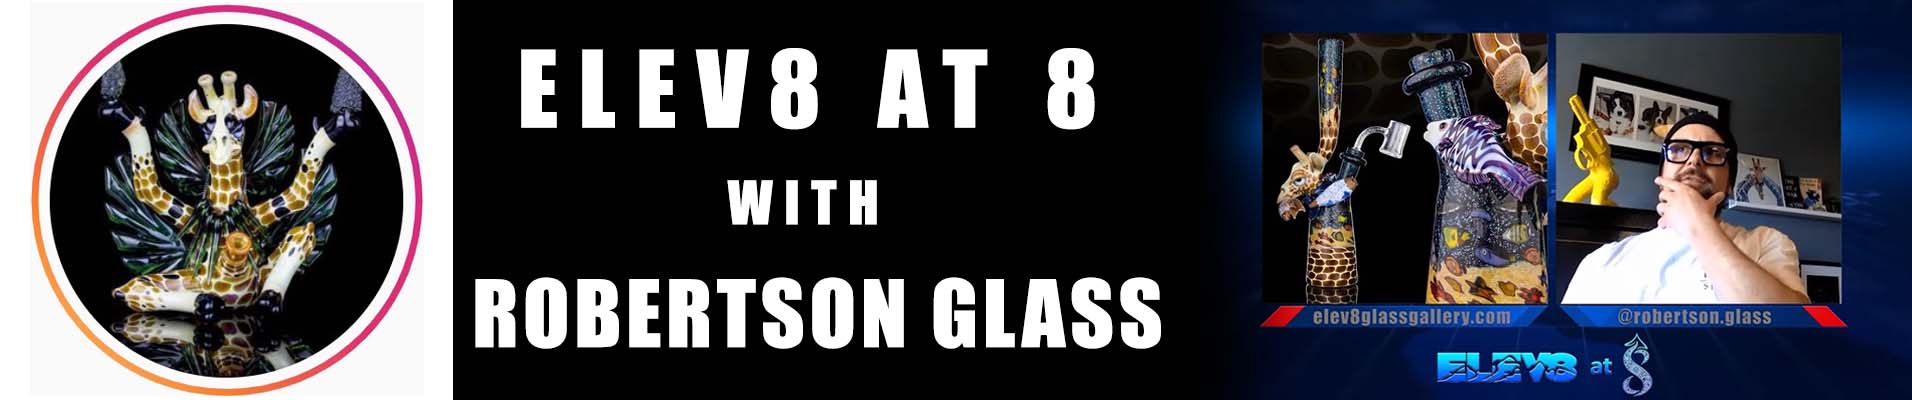 robertson-glass-elev8-at-8-event-page-banner.jpg